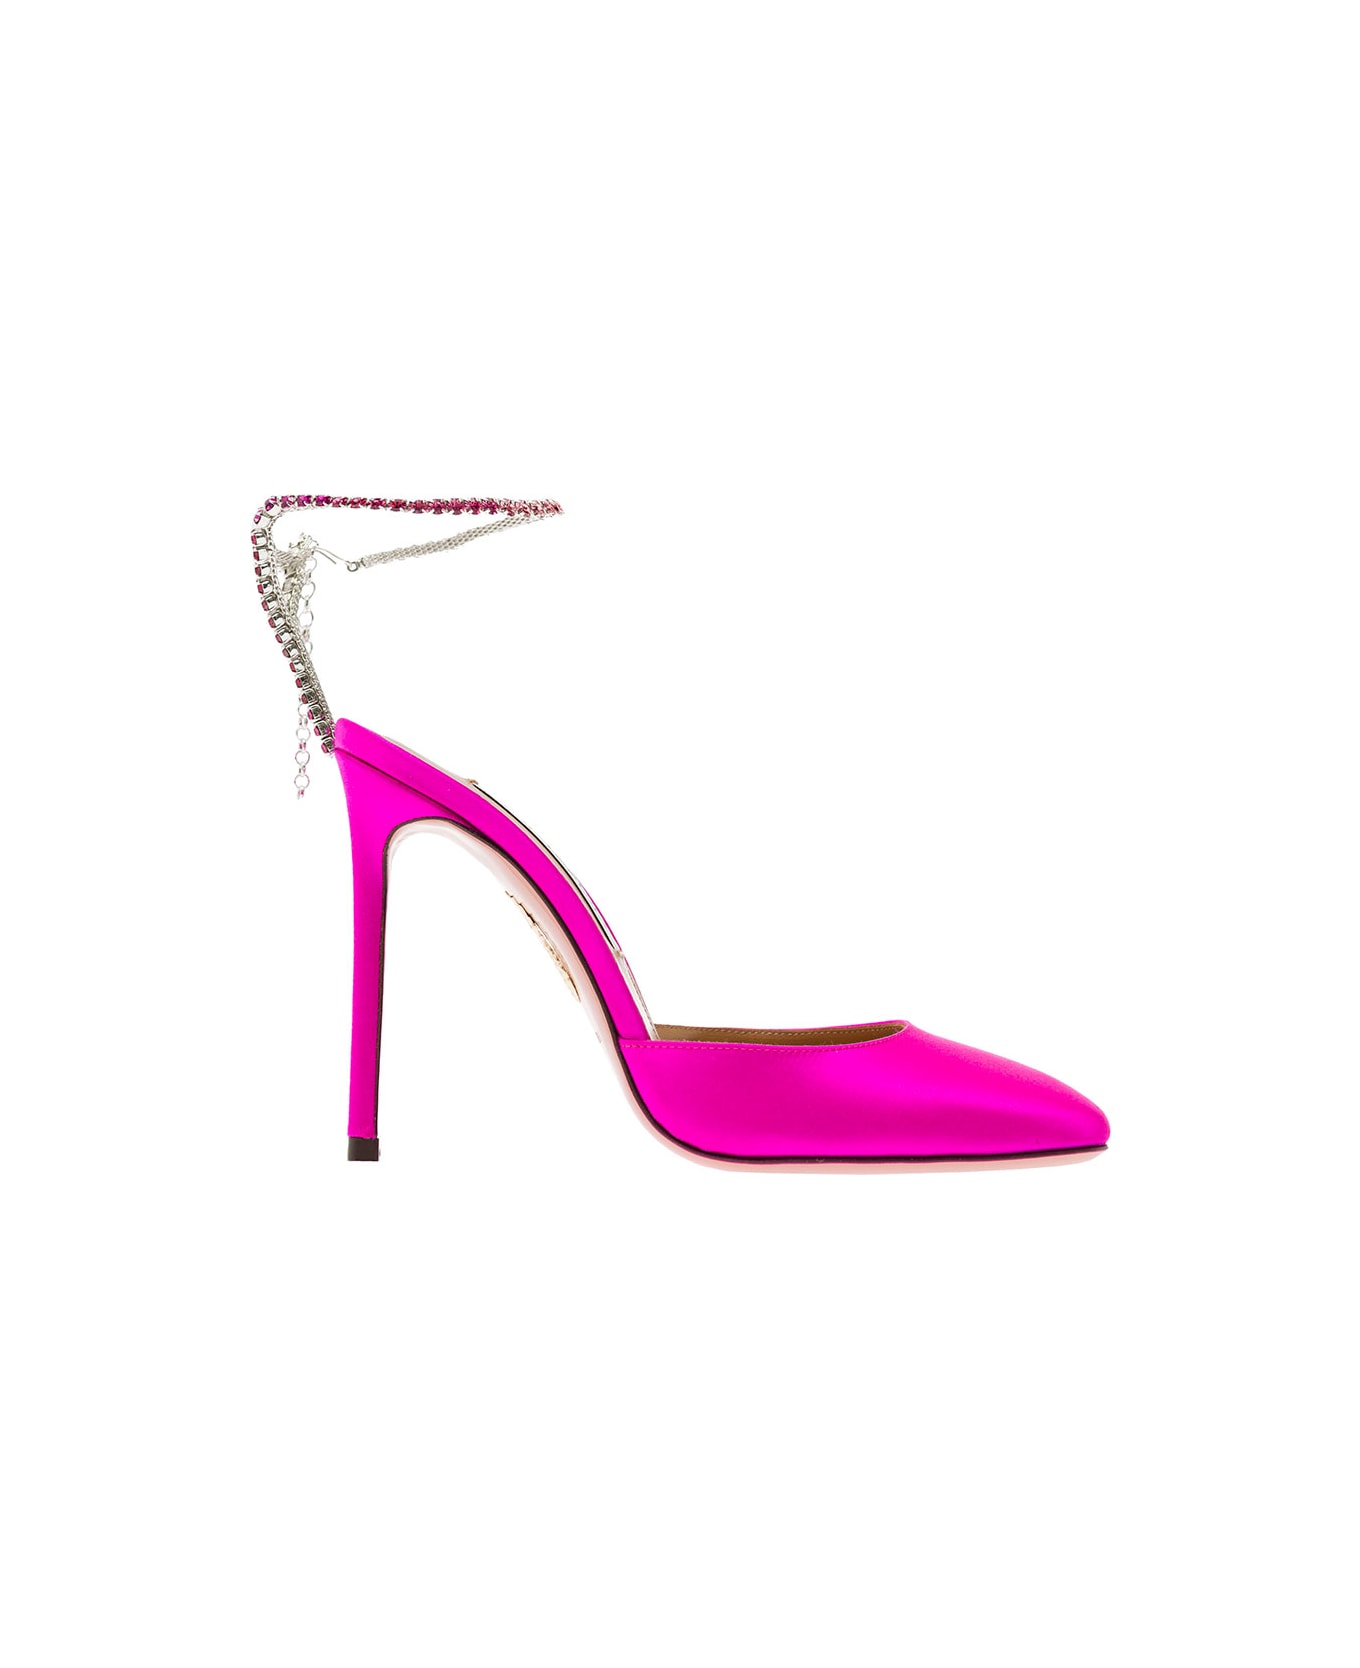 Aquazzura Fuchsia Pink 'ice' Pumps Satin Effect With Crystal Embellishment In Leather Woman - Fuxia